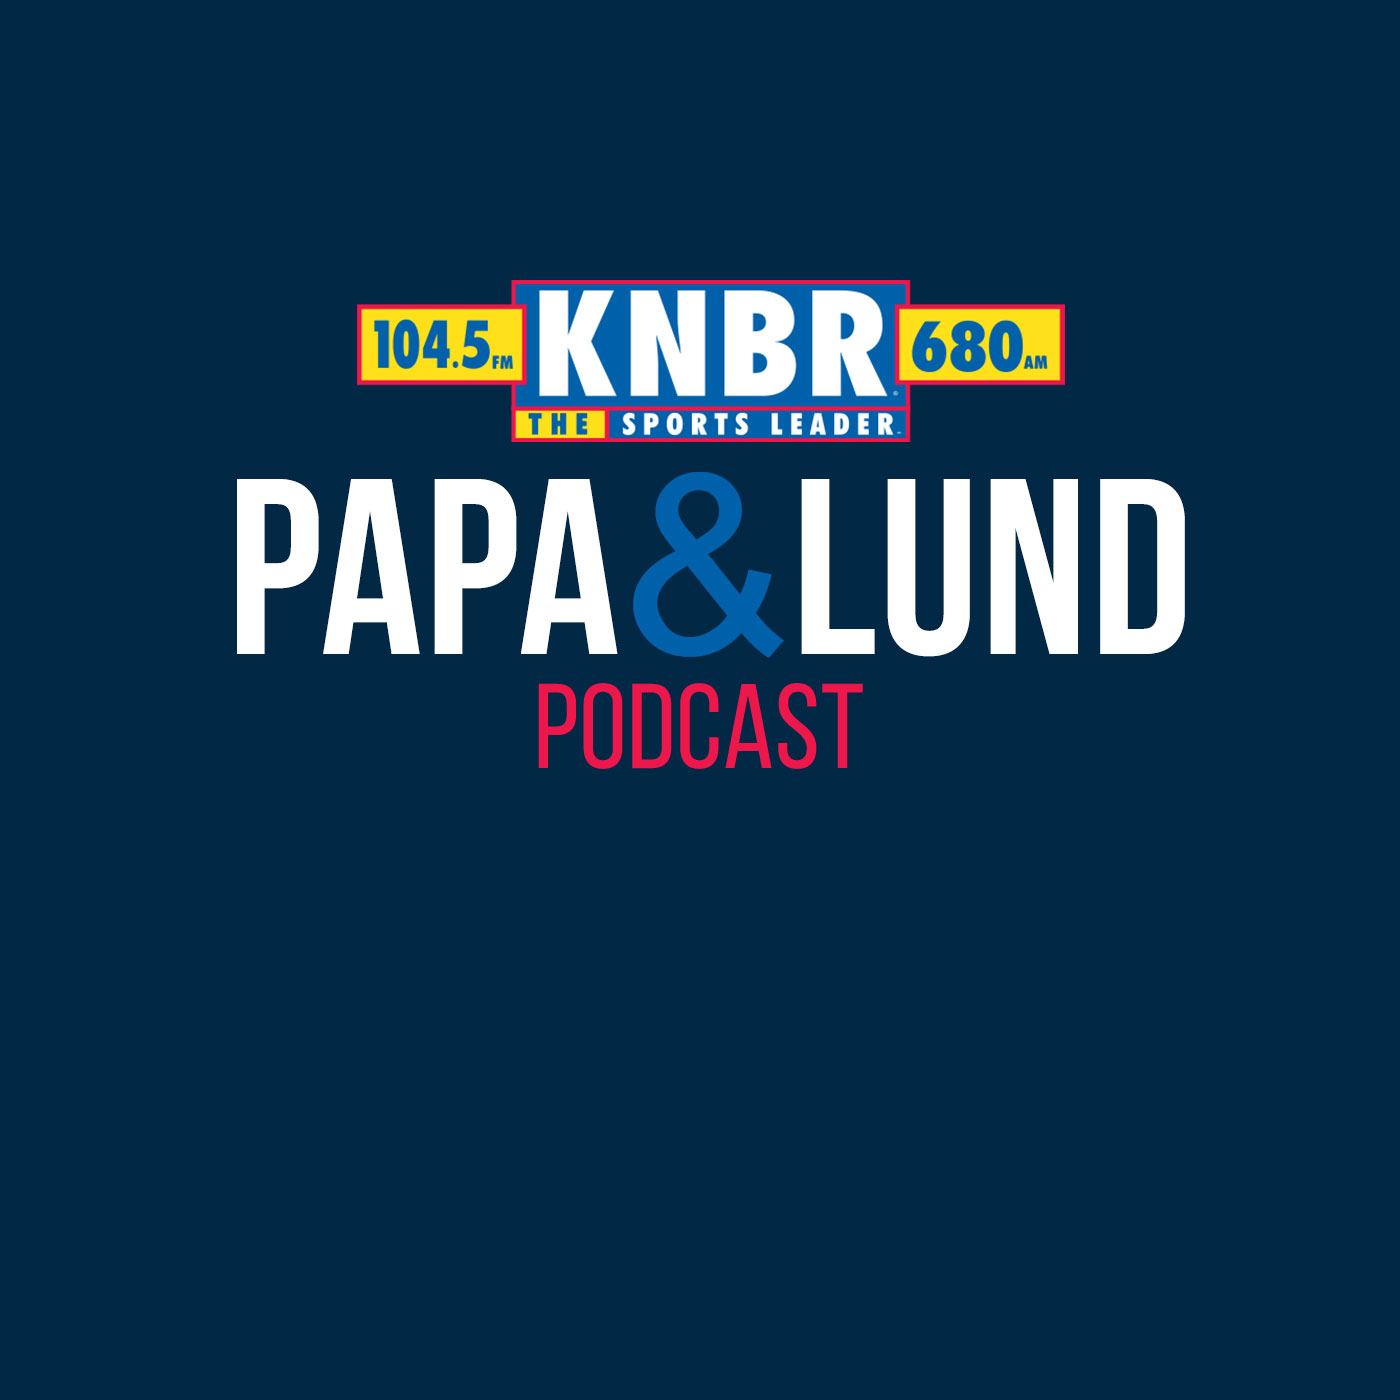 3-26 Marc Spears joins Papa & Lund to discuss how the Warriors could approach the Offseason after having a disappointing end to the NBA season